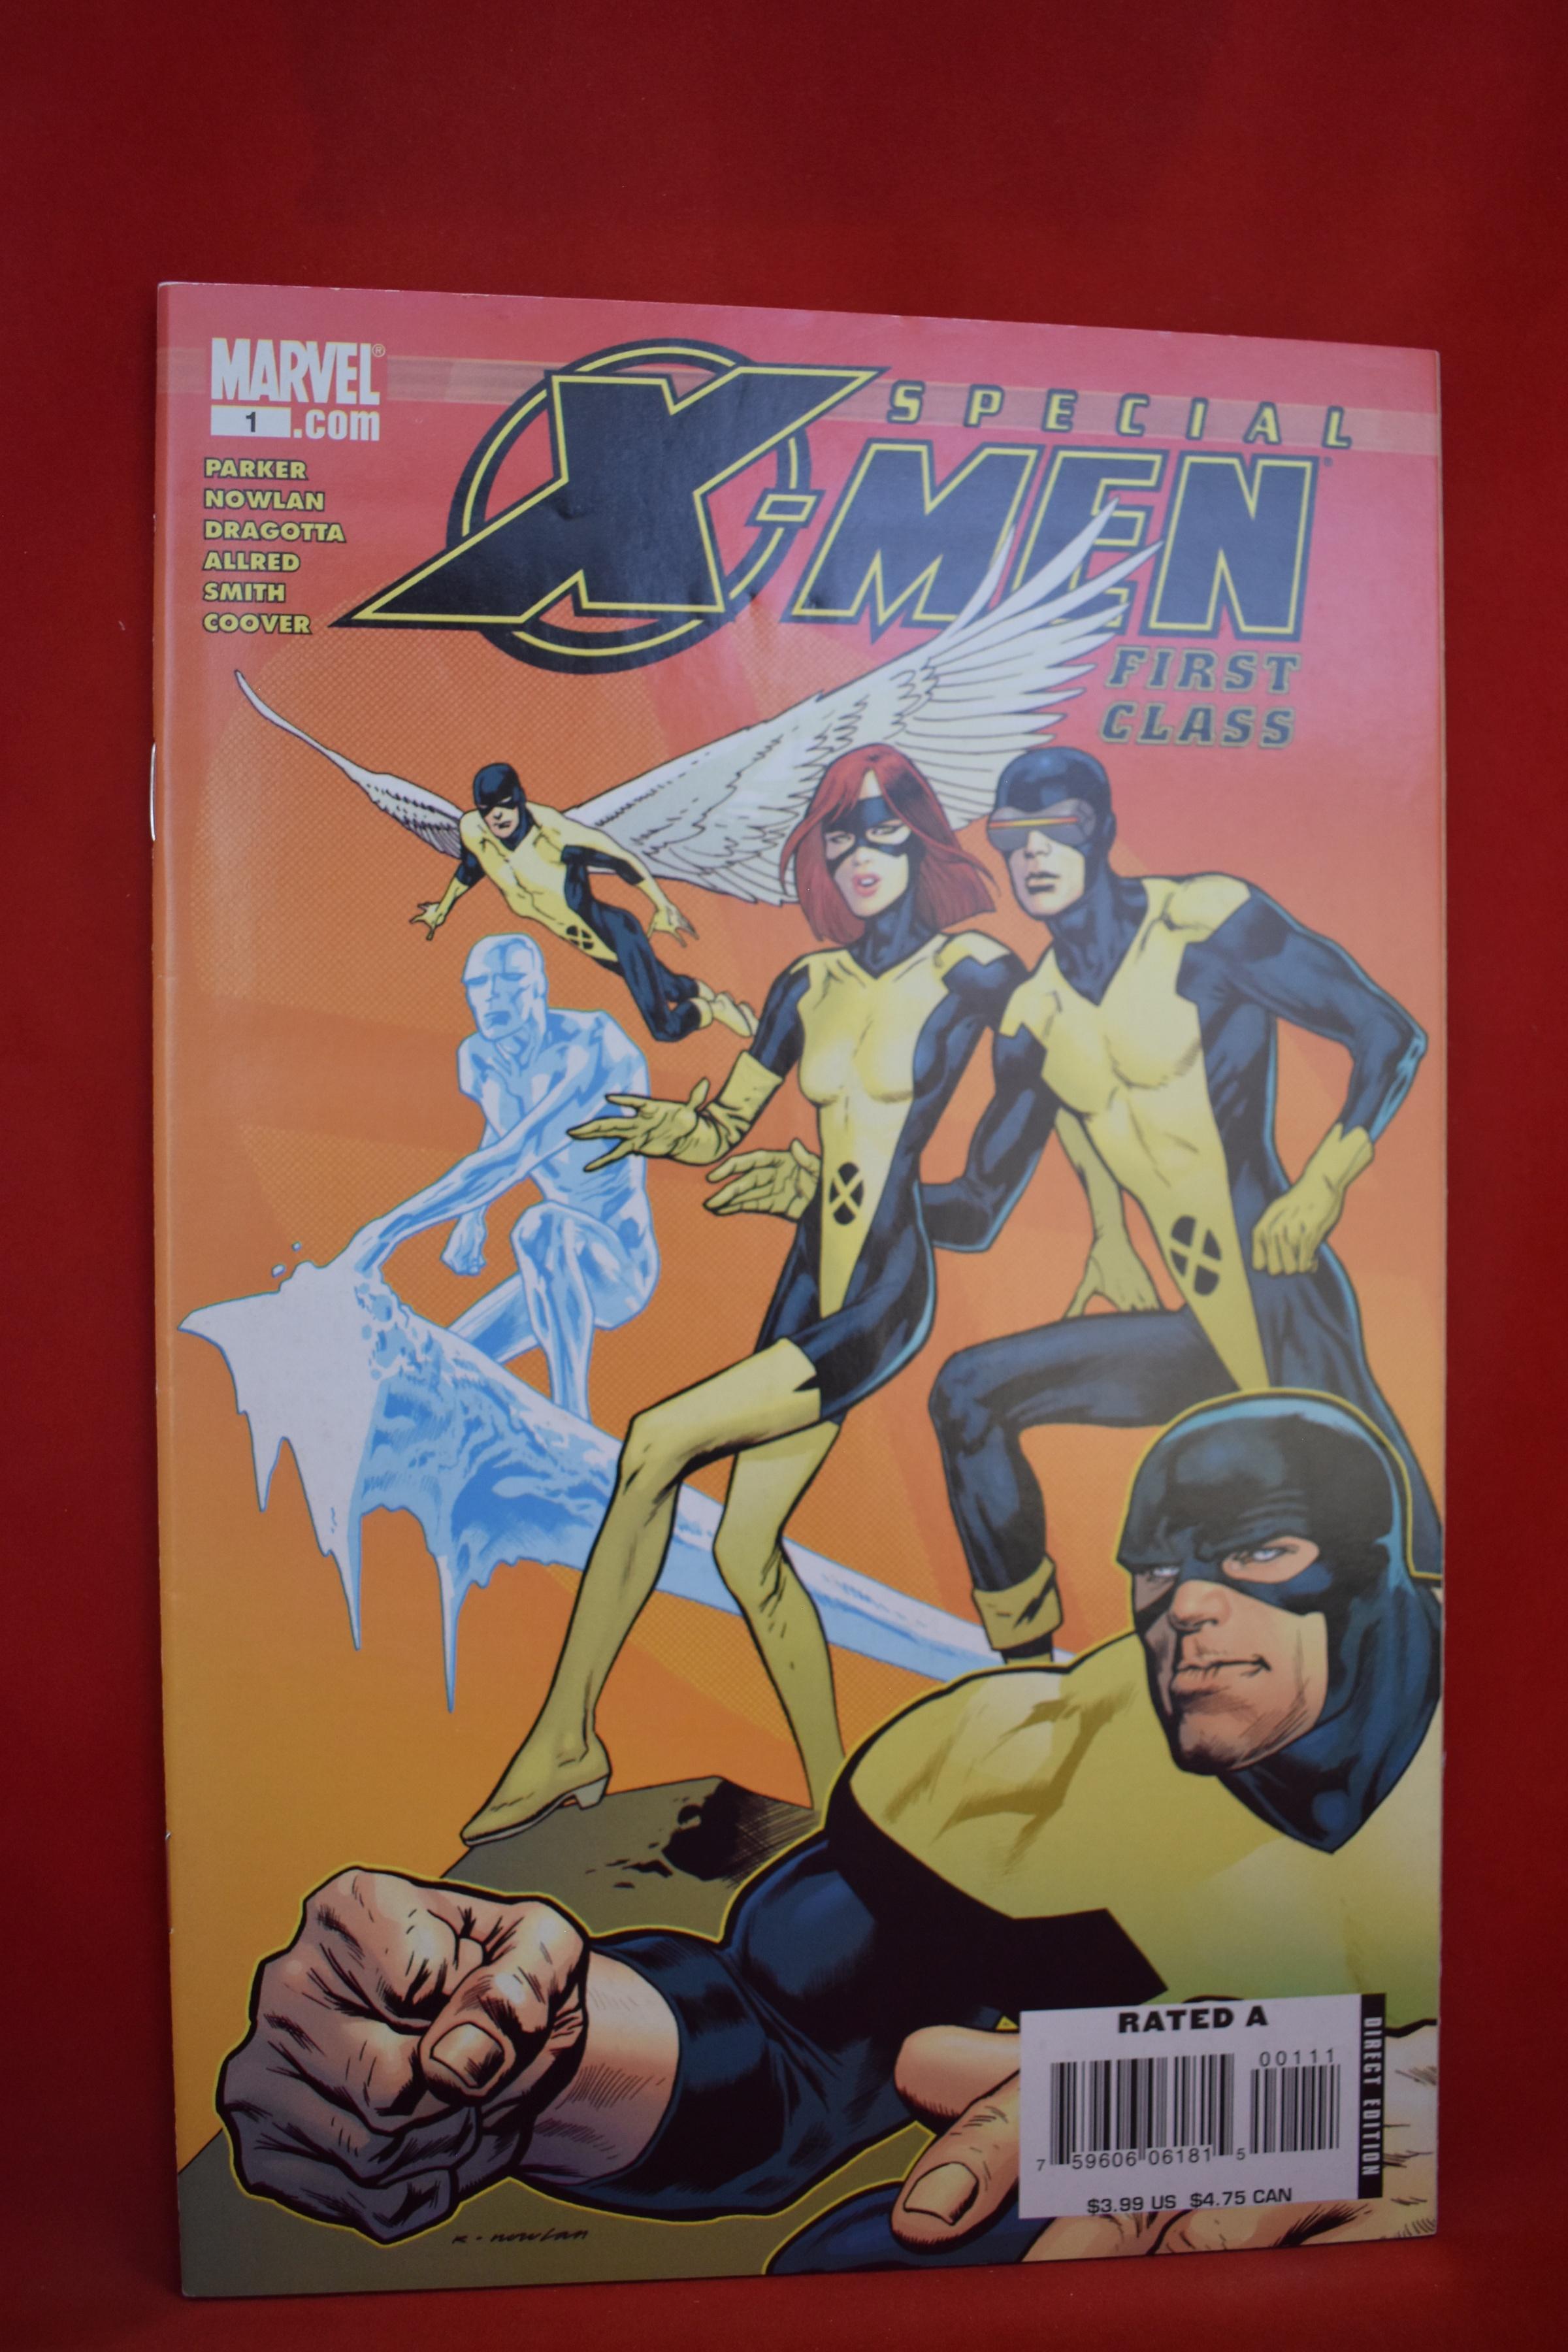 X-MEN FIRST CLASS SPECIAL #1 | A GIRL AND HER DRAGON! | KEVIN NOWLAN ART